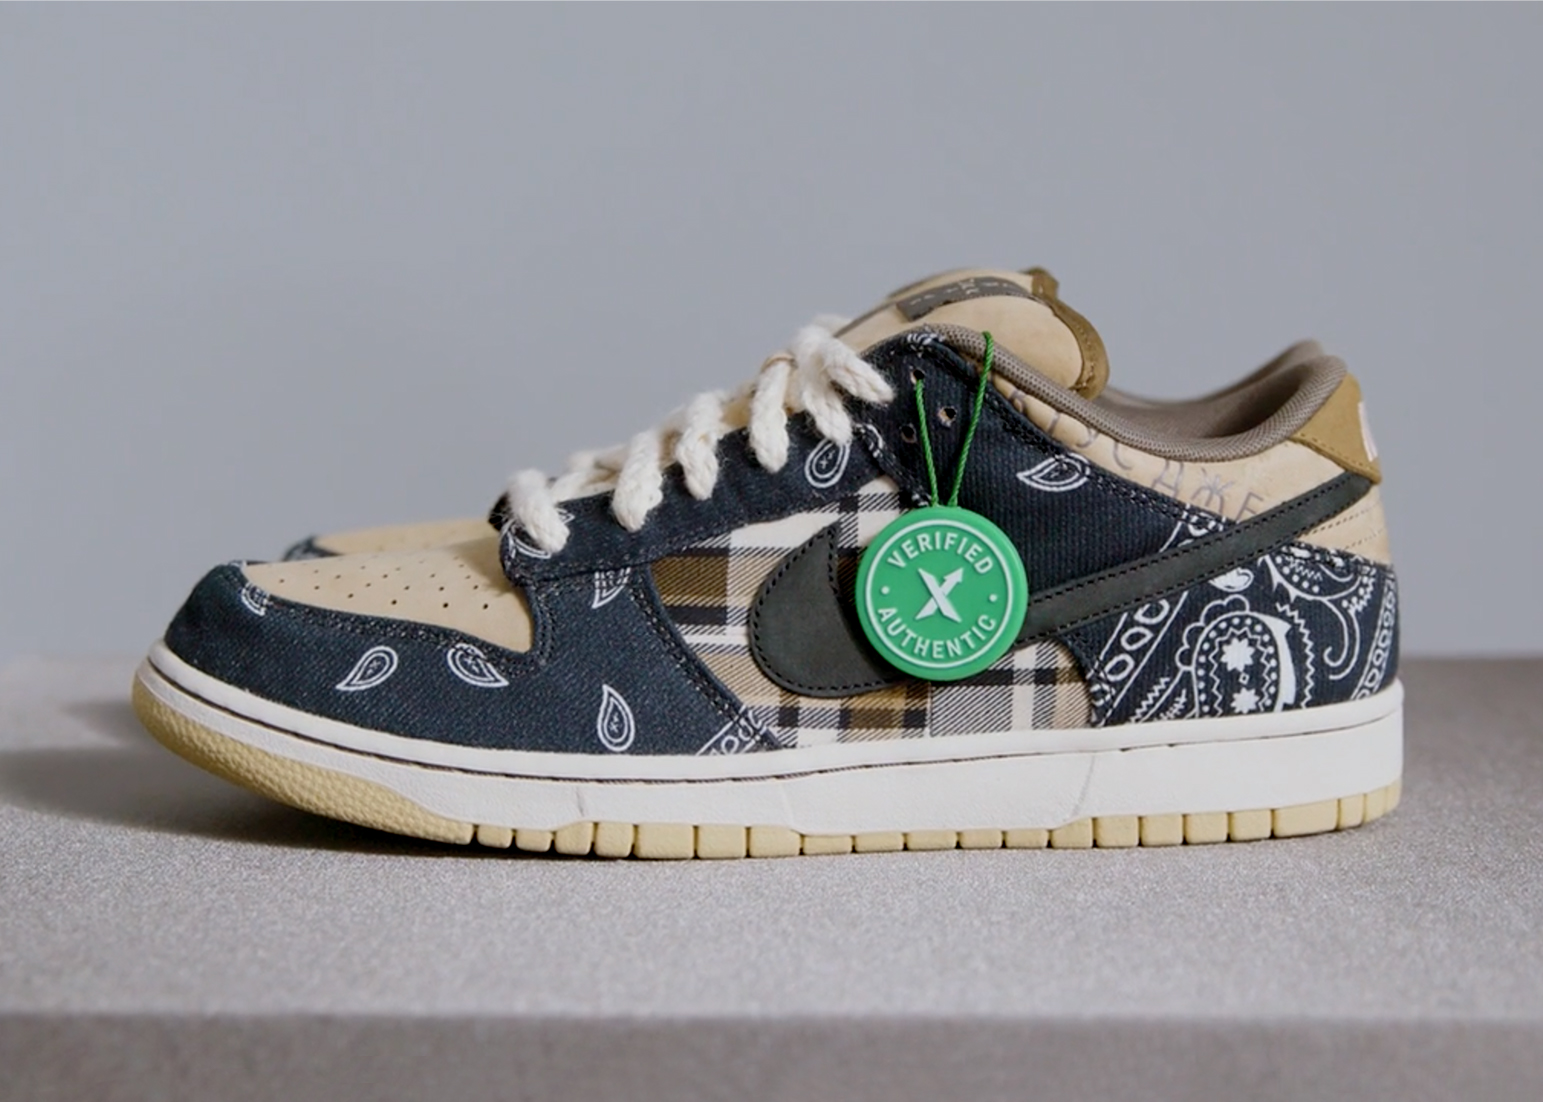 Chopped & Screwed with the Travis Scott Nike SB Dunk Low | Details